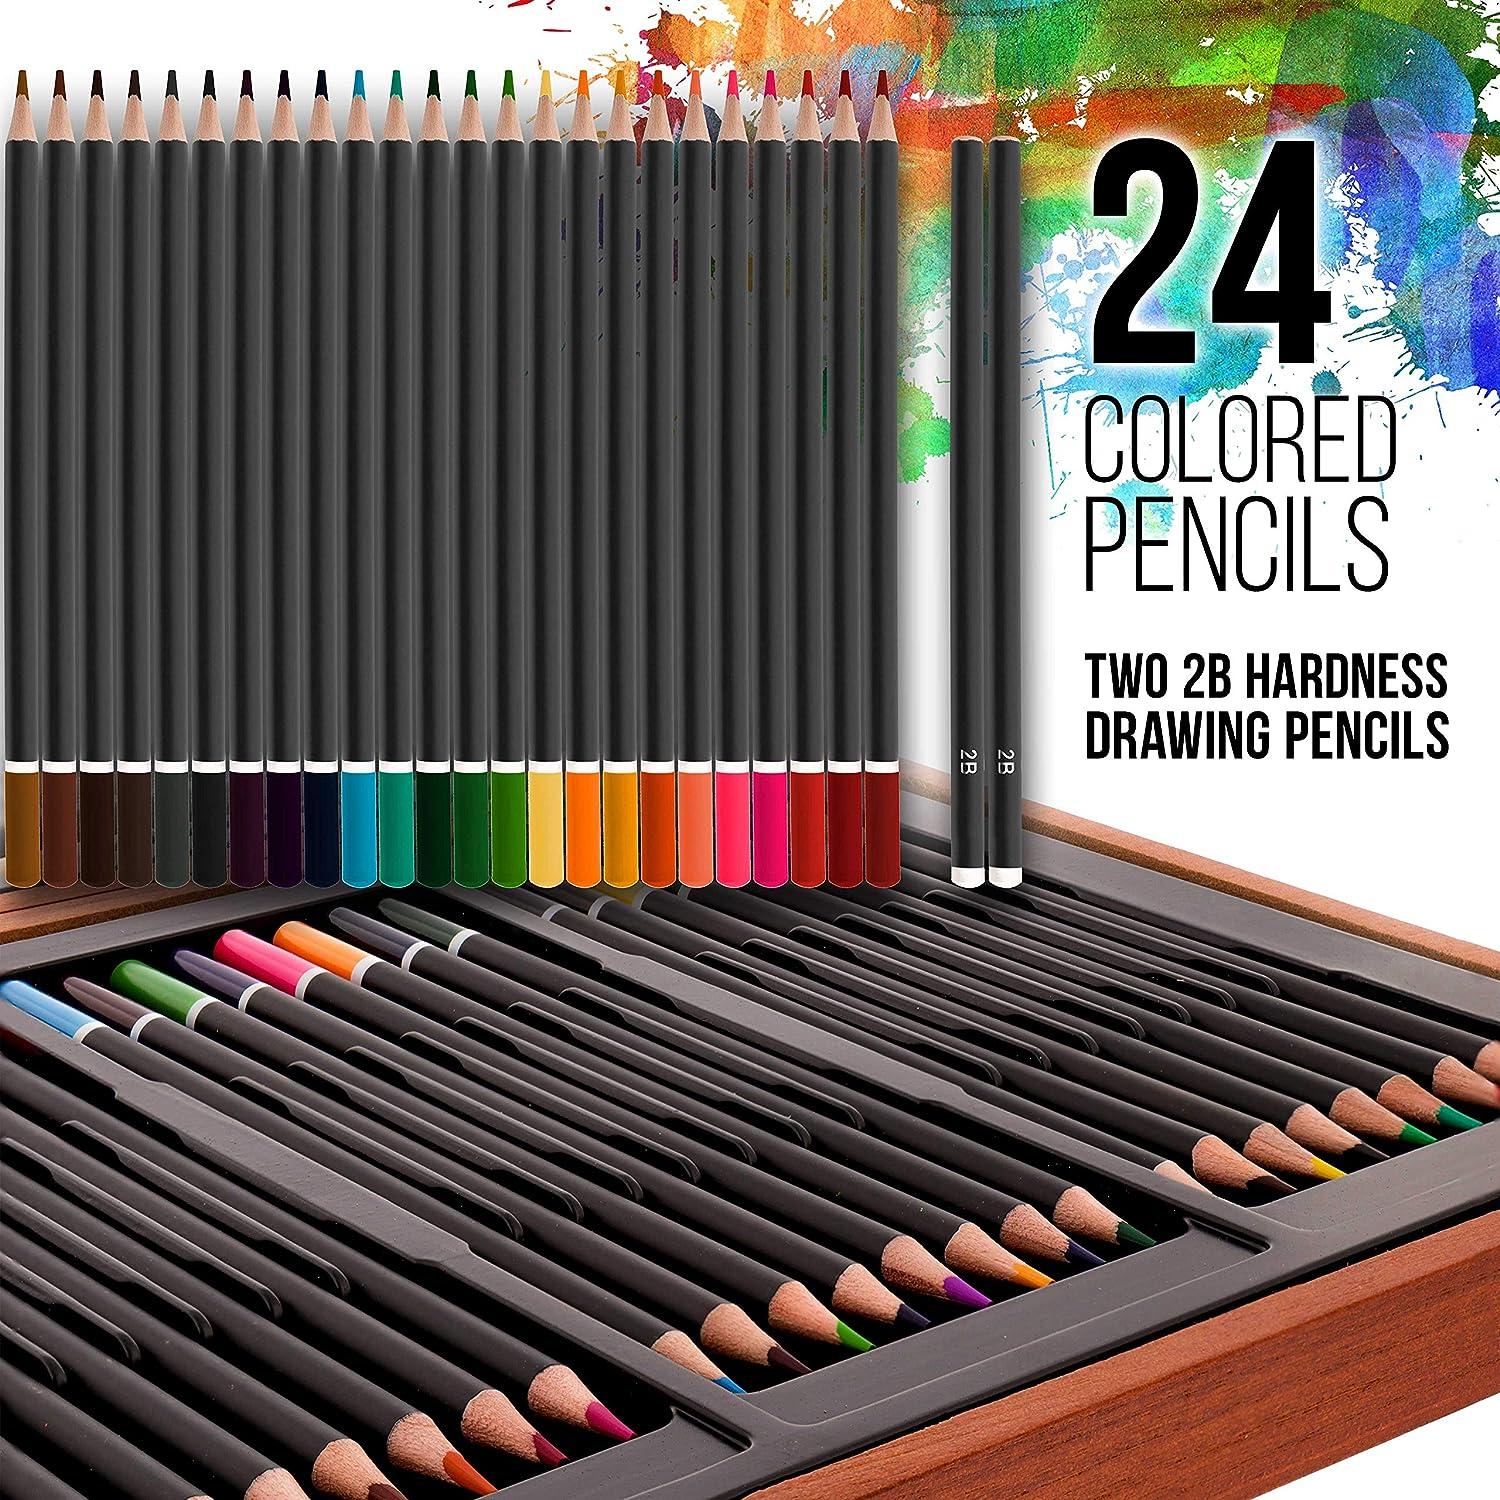 US Art Supply 162-Piece Deluxe Mega Wood Box Art Painting and Drawing Set -  Artist Painting Pad, 2 Sketch Pads, 24 Watercolor Paint Colors, 24 Oil